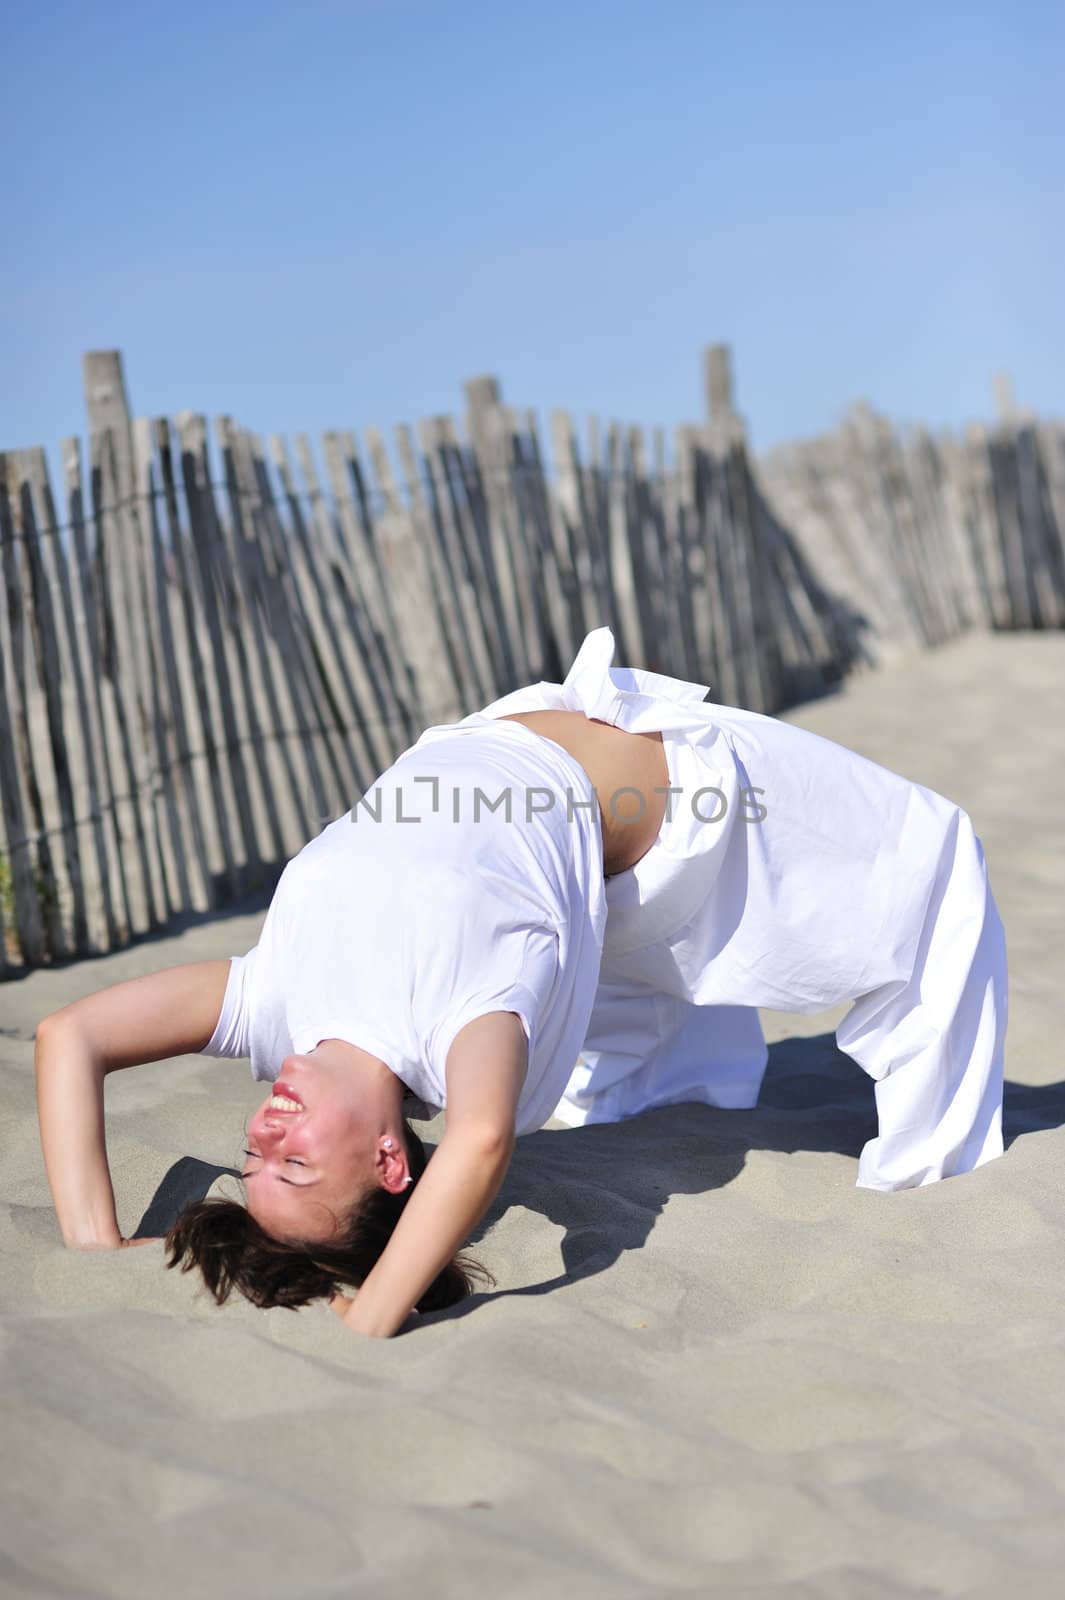 Woman doing stretching on the beach